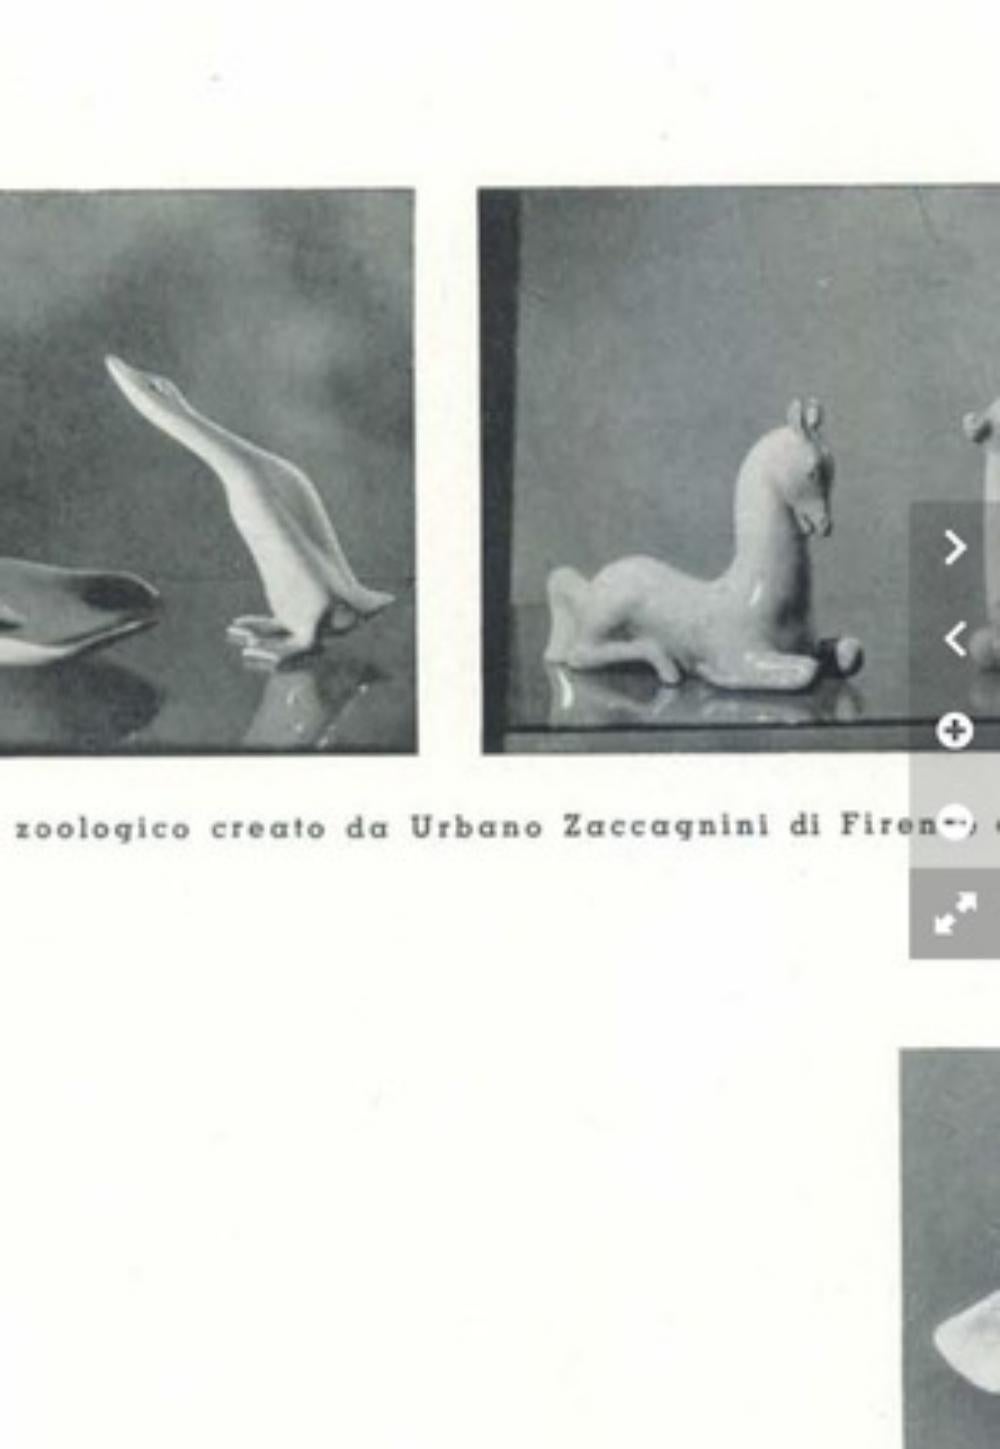 Pair of Airbrushed Ceramic Ducks Decorative Objects by Ugo Zaccagnini, Italy For Sale 2